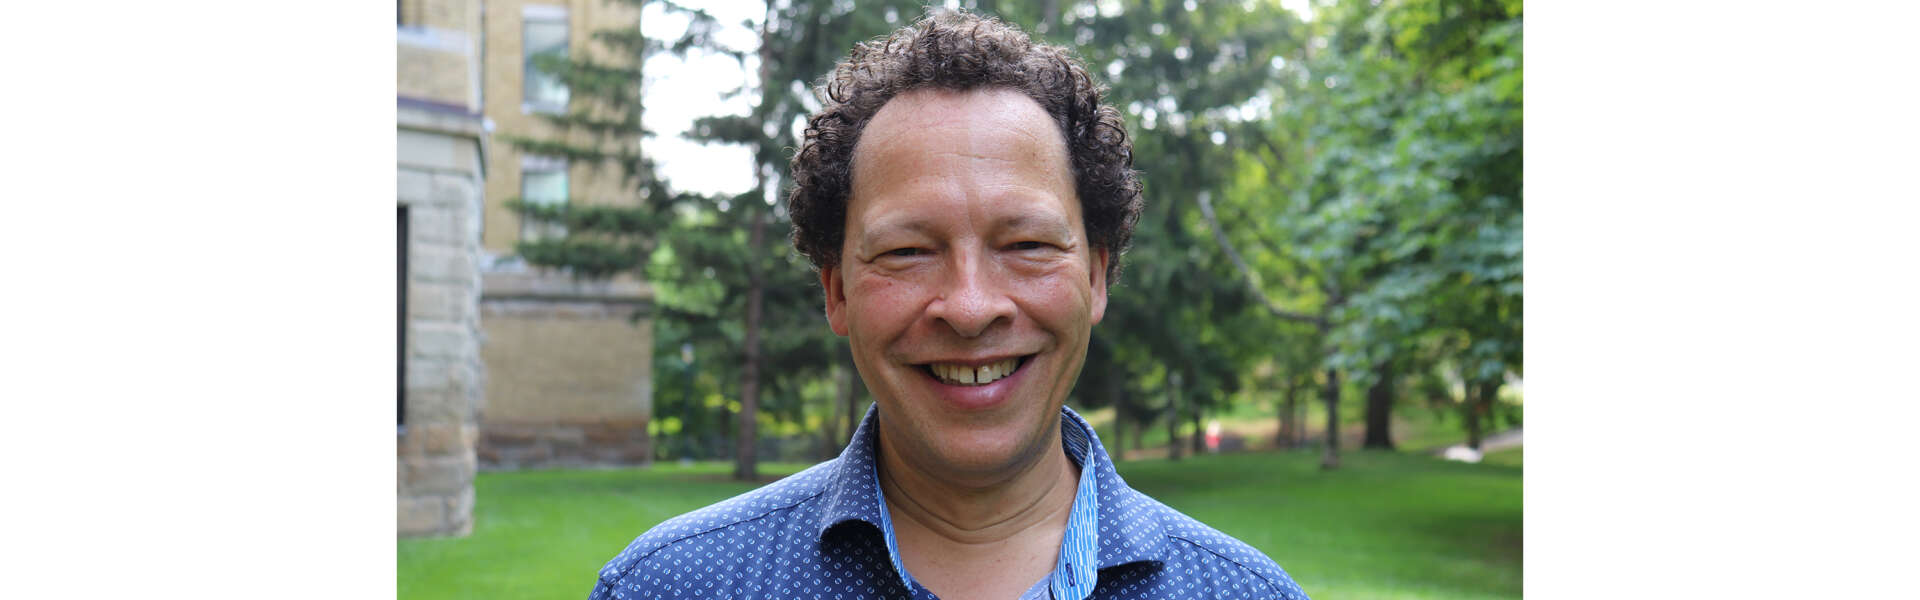 Lawrence Hill smiles for a portrait while standing outside with trees behind